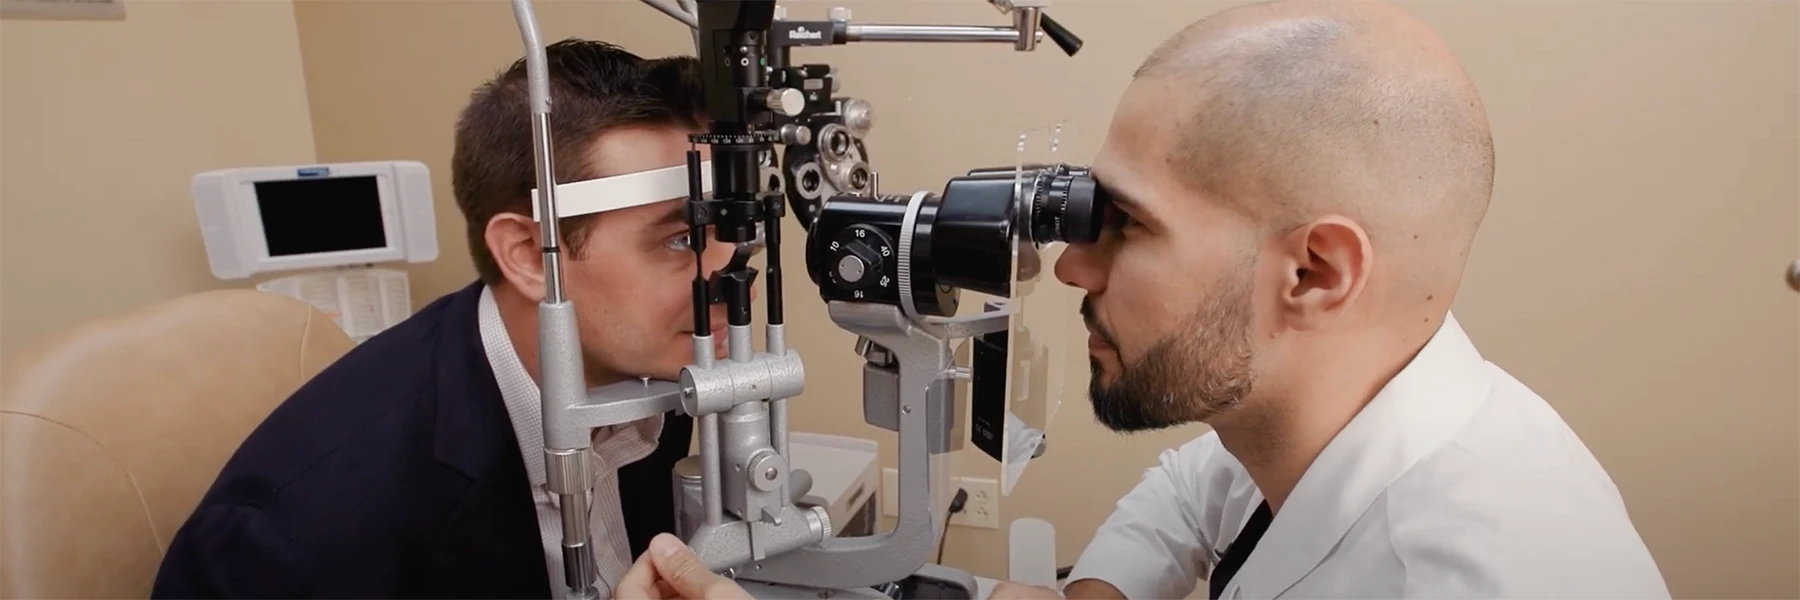 Patient is examined by doctor for vision correction surgery